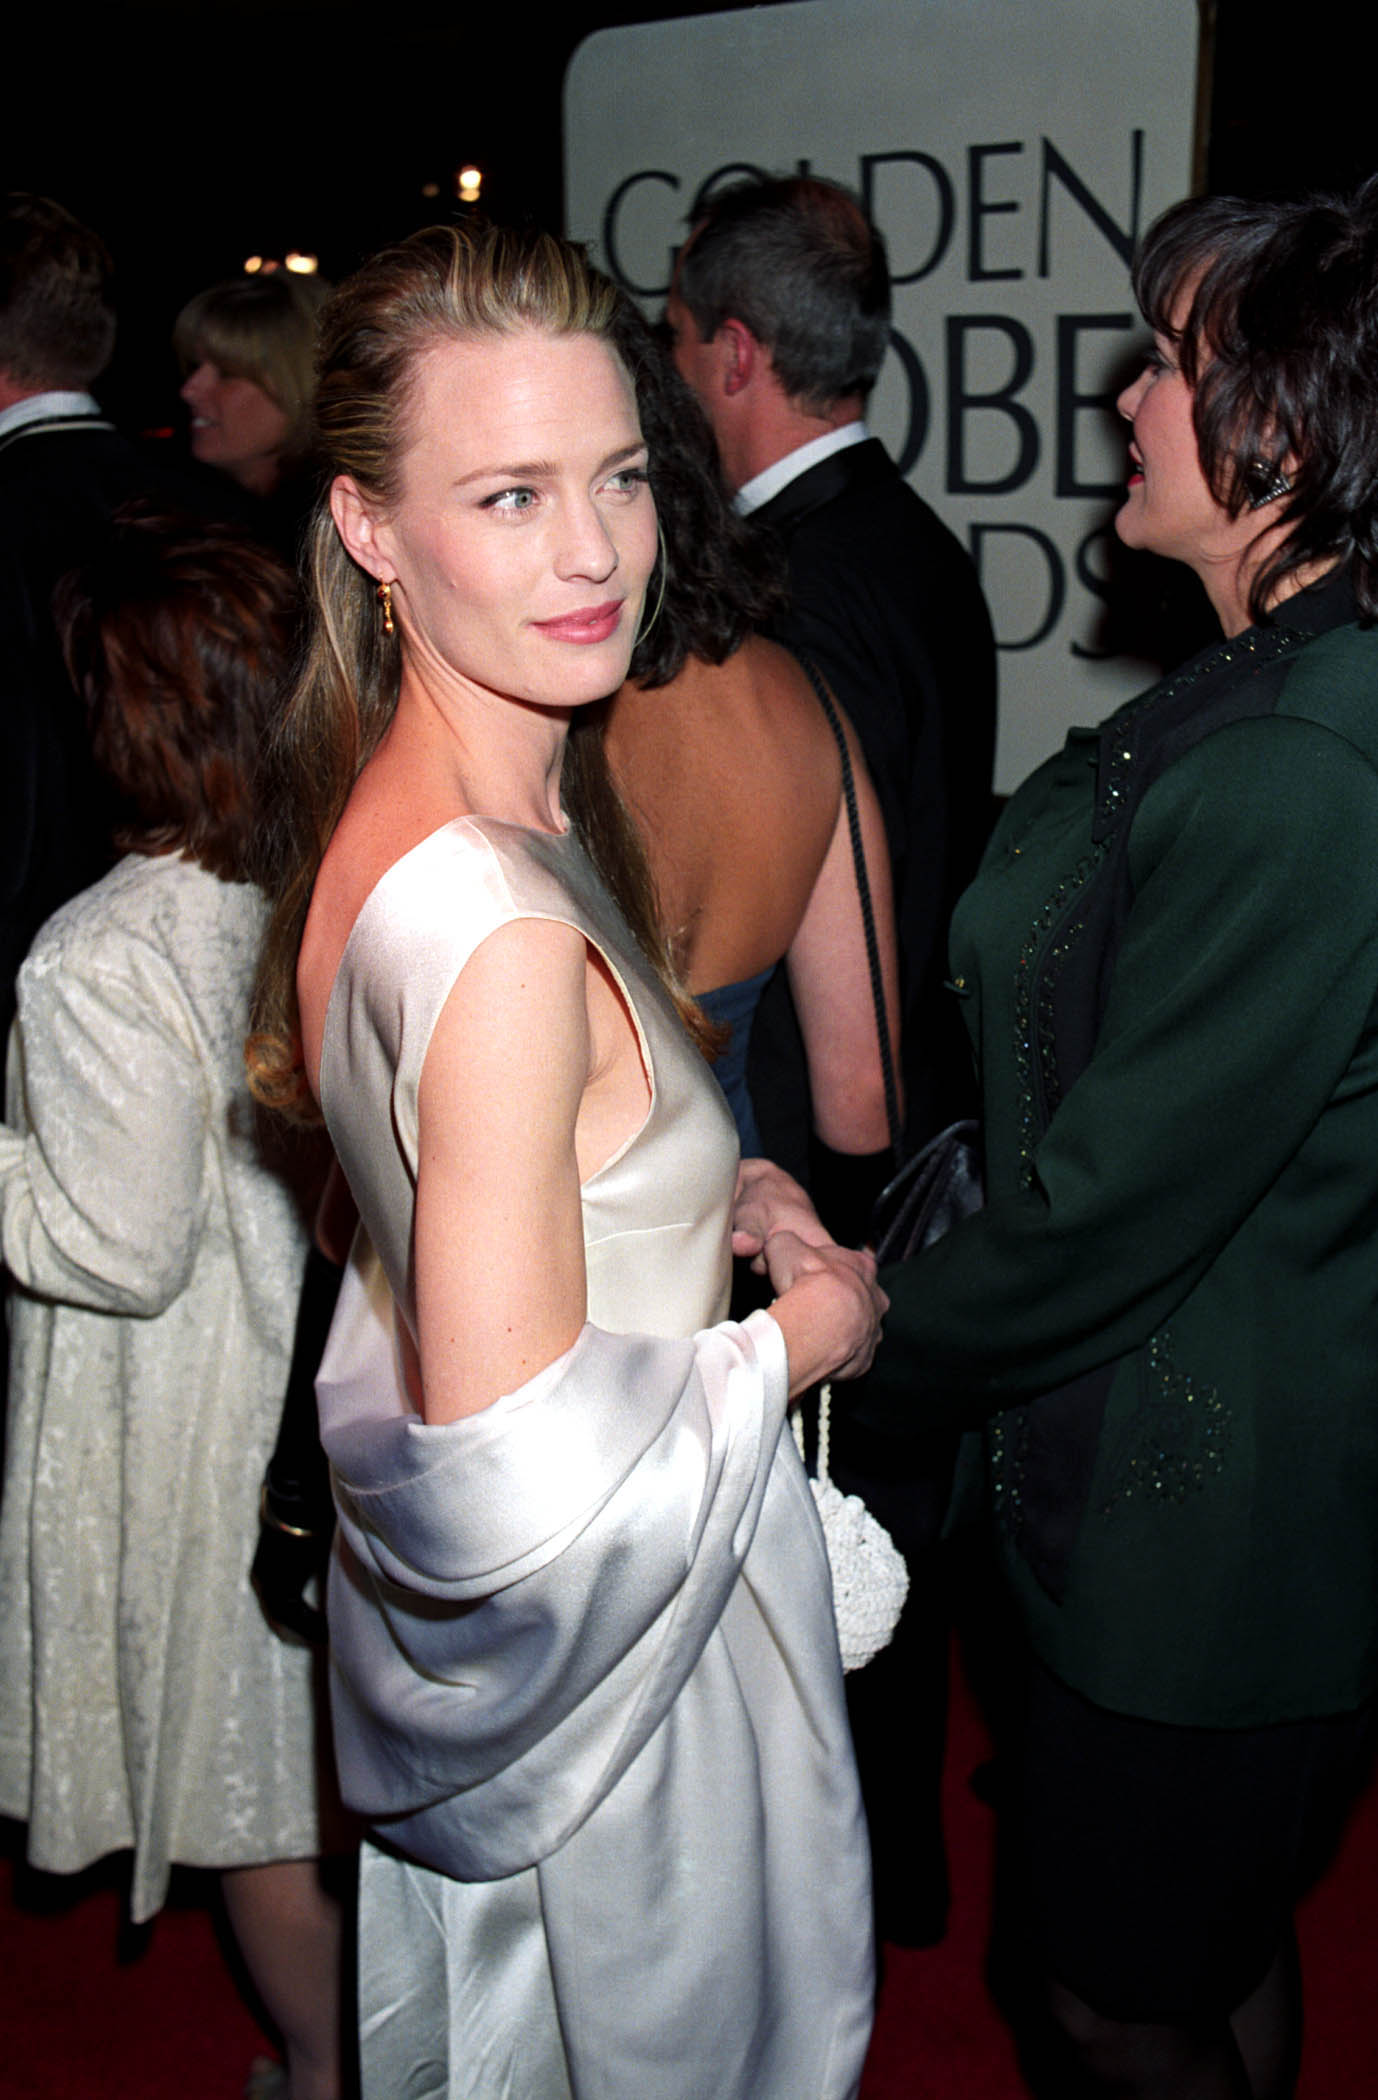 Robin Wright during the Golden Globe Awards in Los Angeles, California, on September 7, 1995. | Source: Getty Images